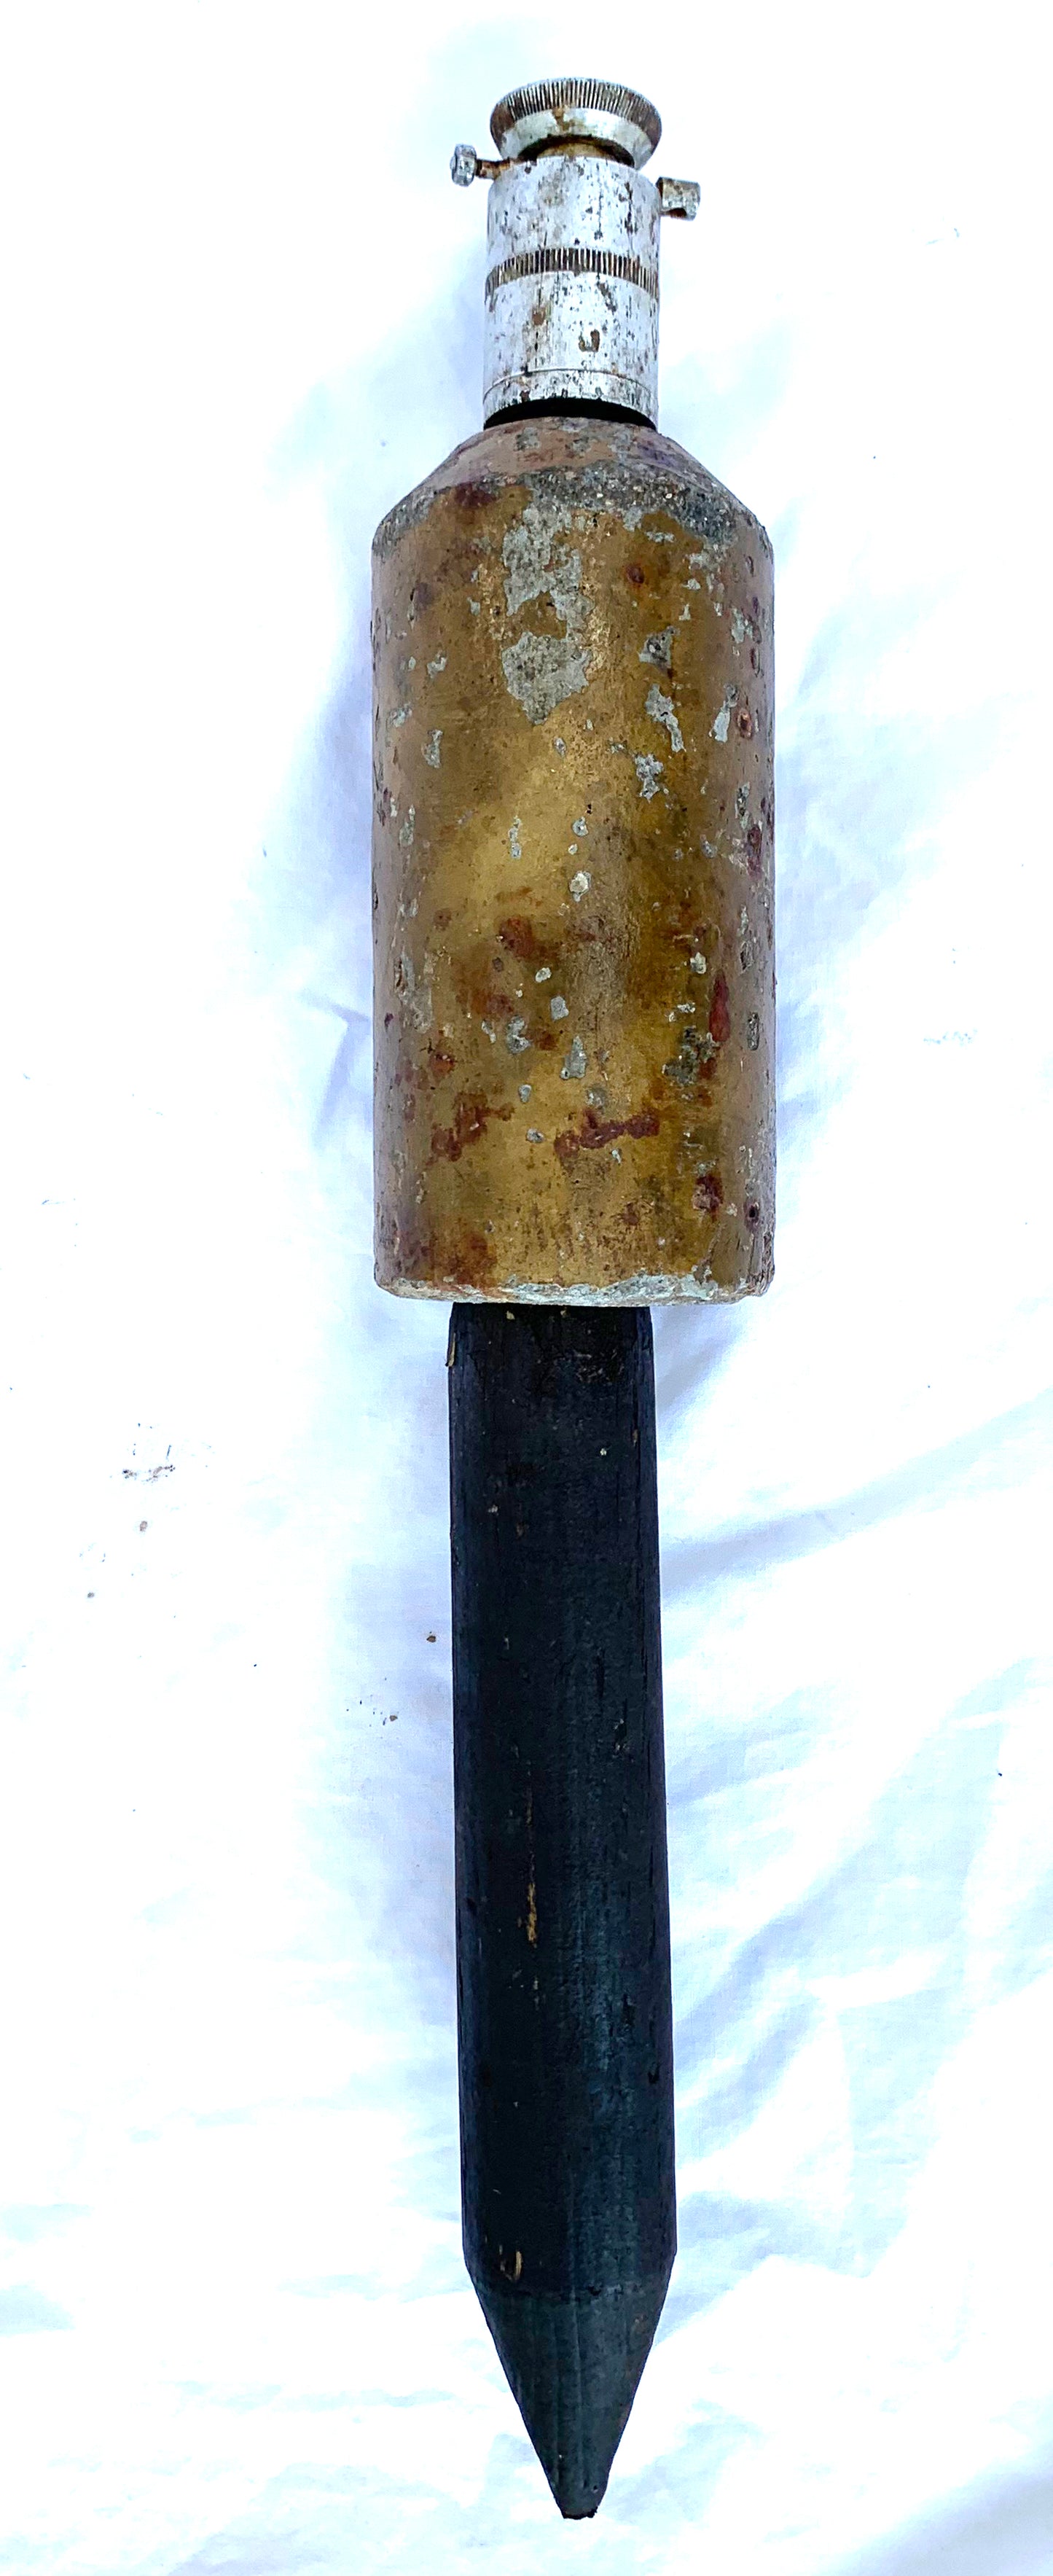 WW2 German Concrete Mine with Compression Fuse and Stake - Inert.